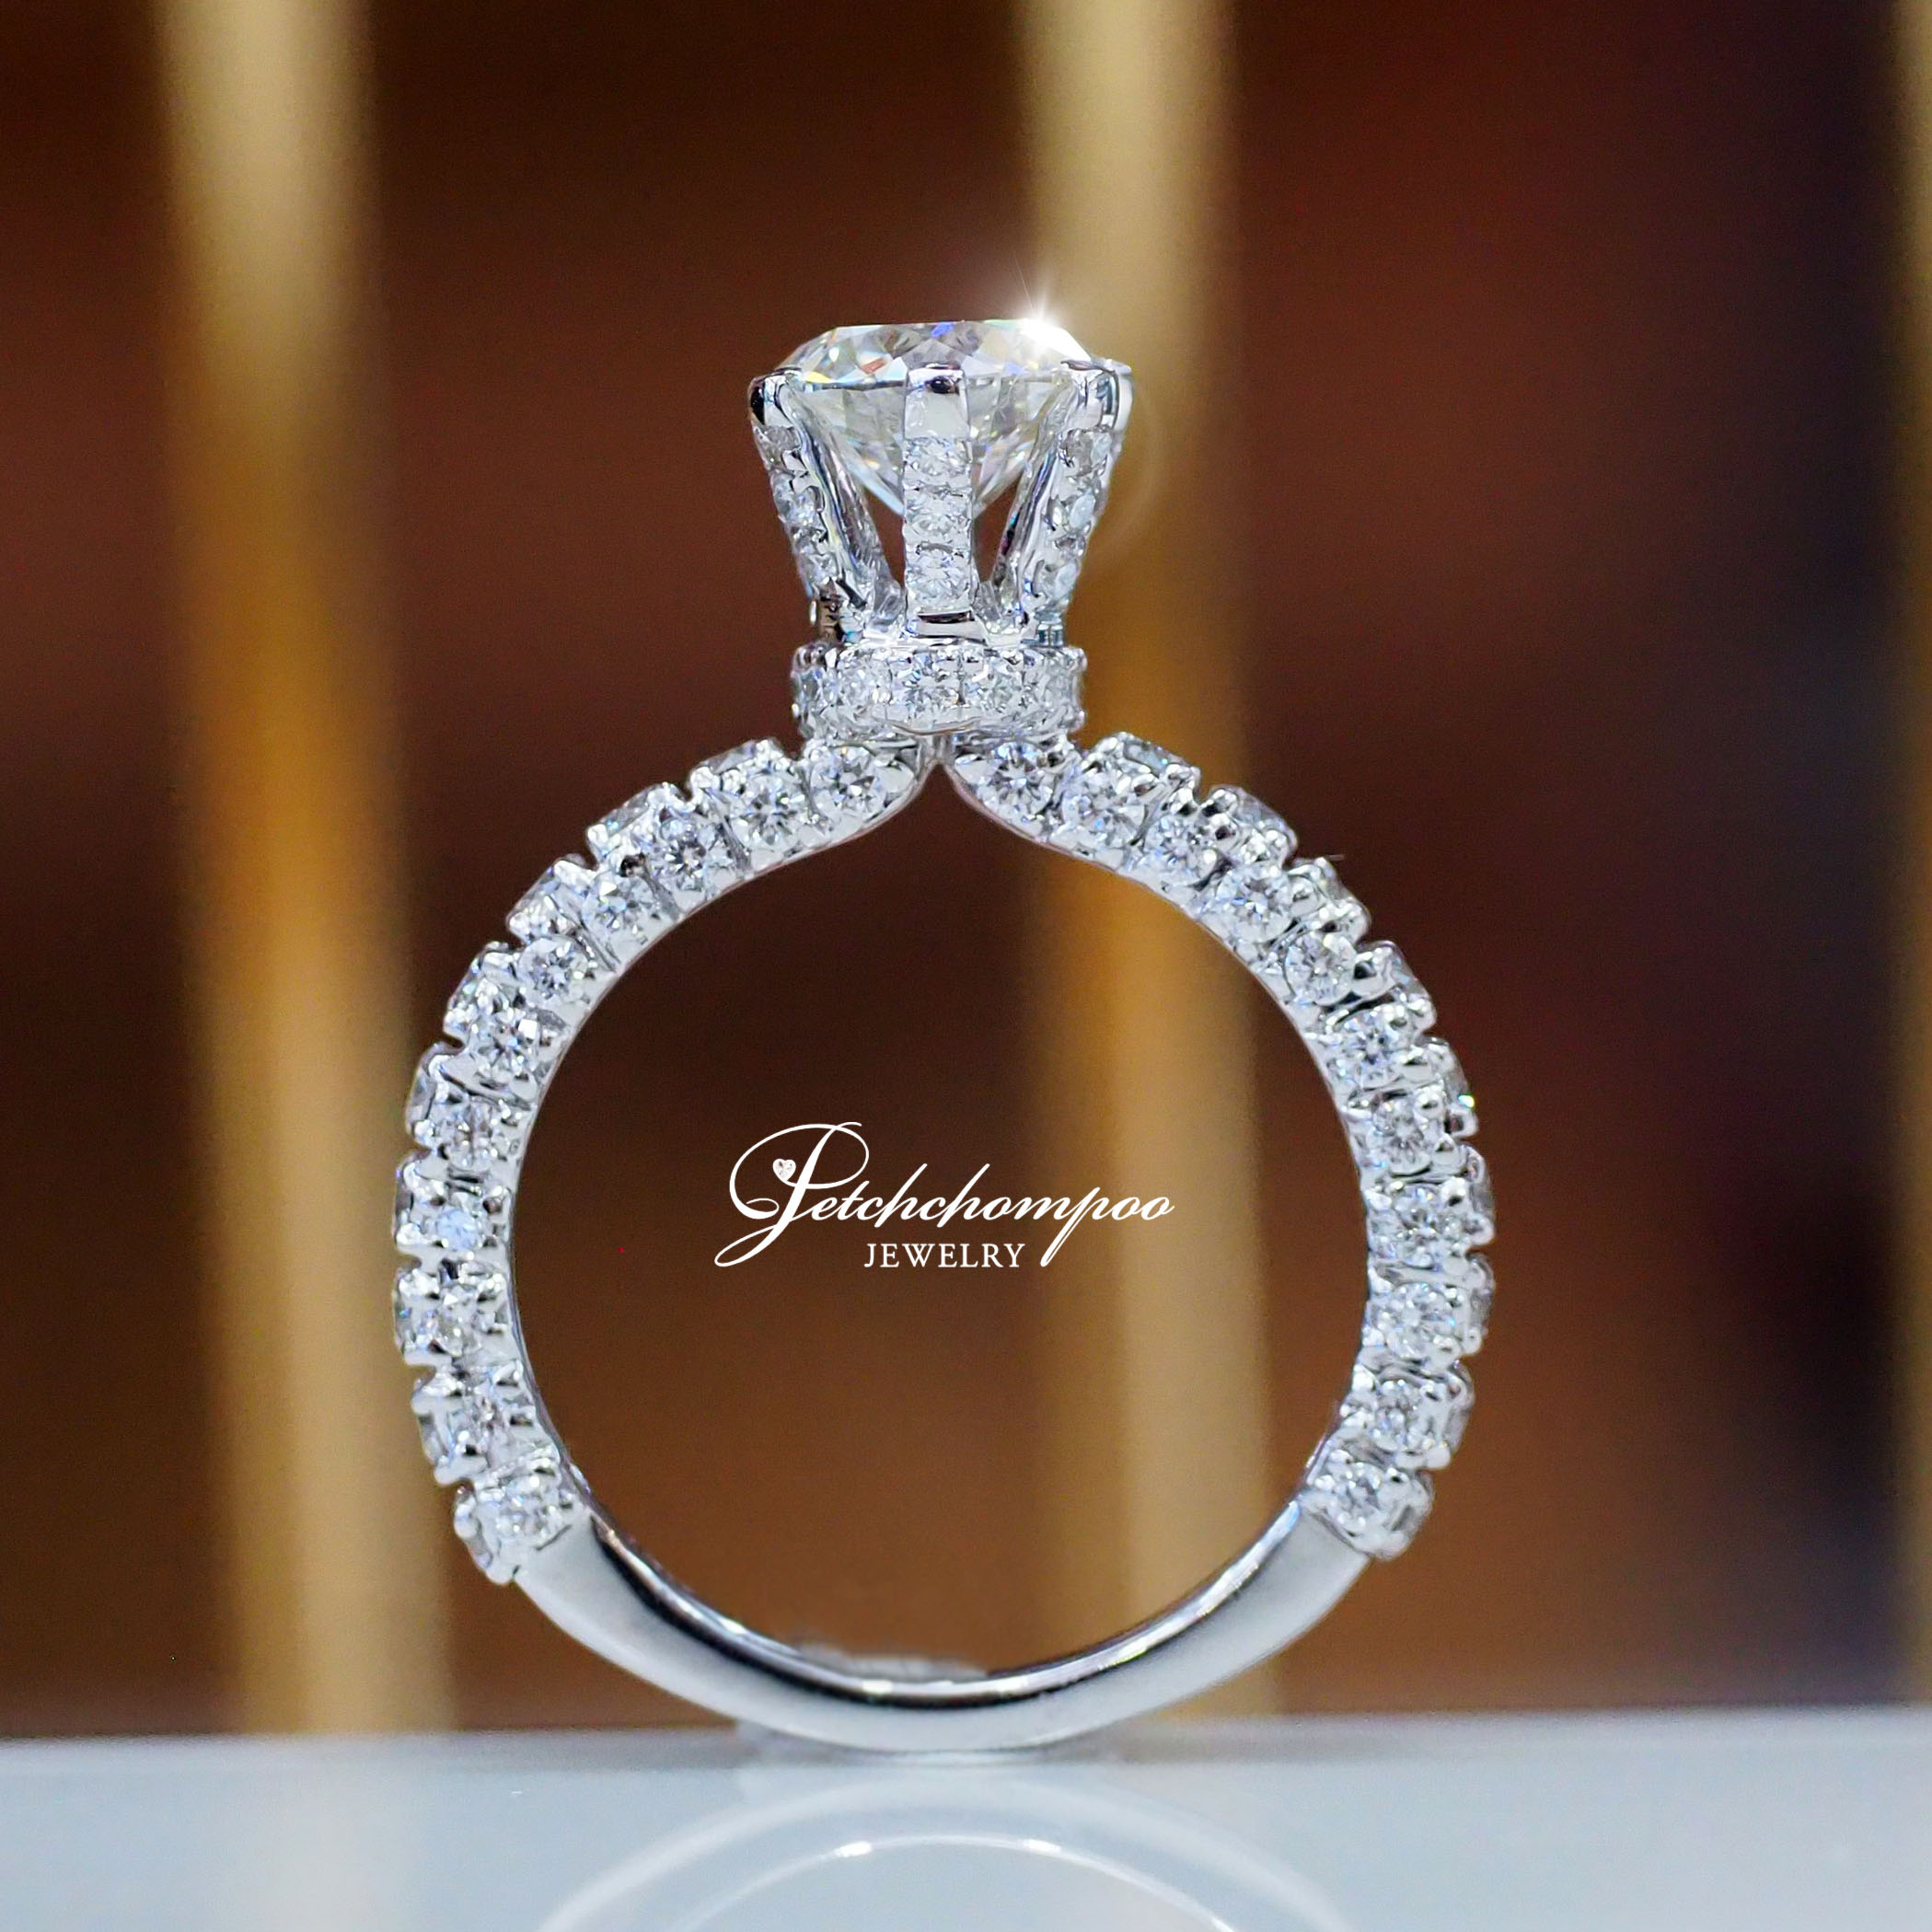 [27001] Certified Diamond Ring HRD 1.06 ct. Triple Excellent Discount 349,000